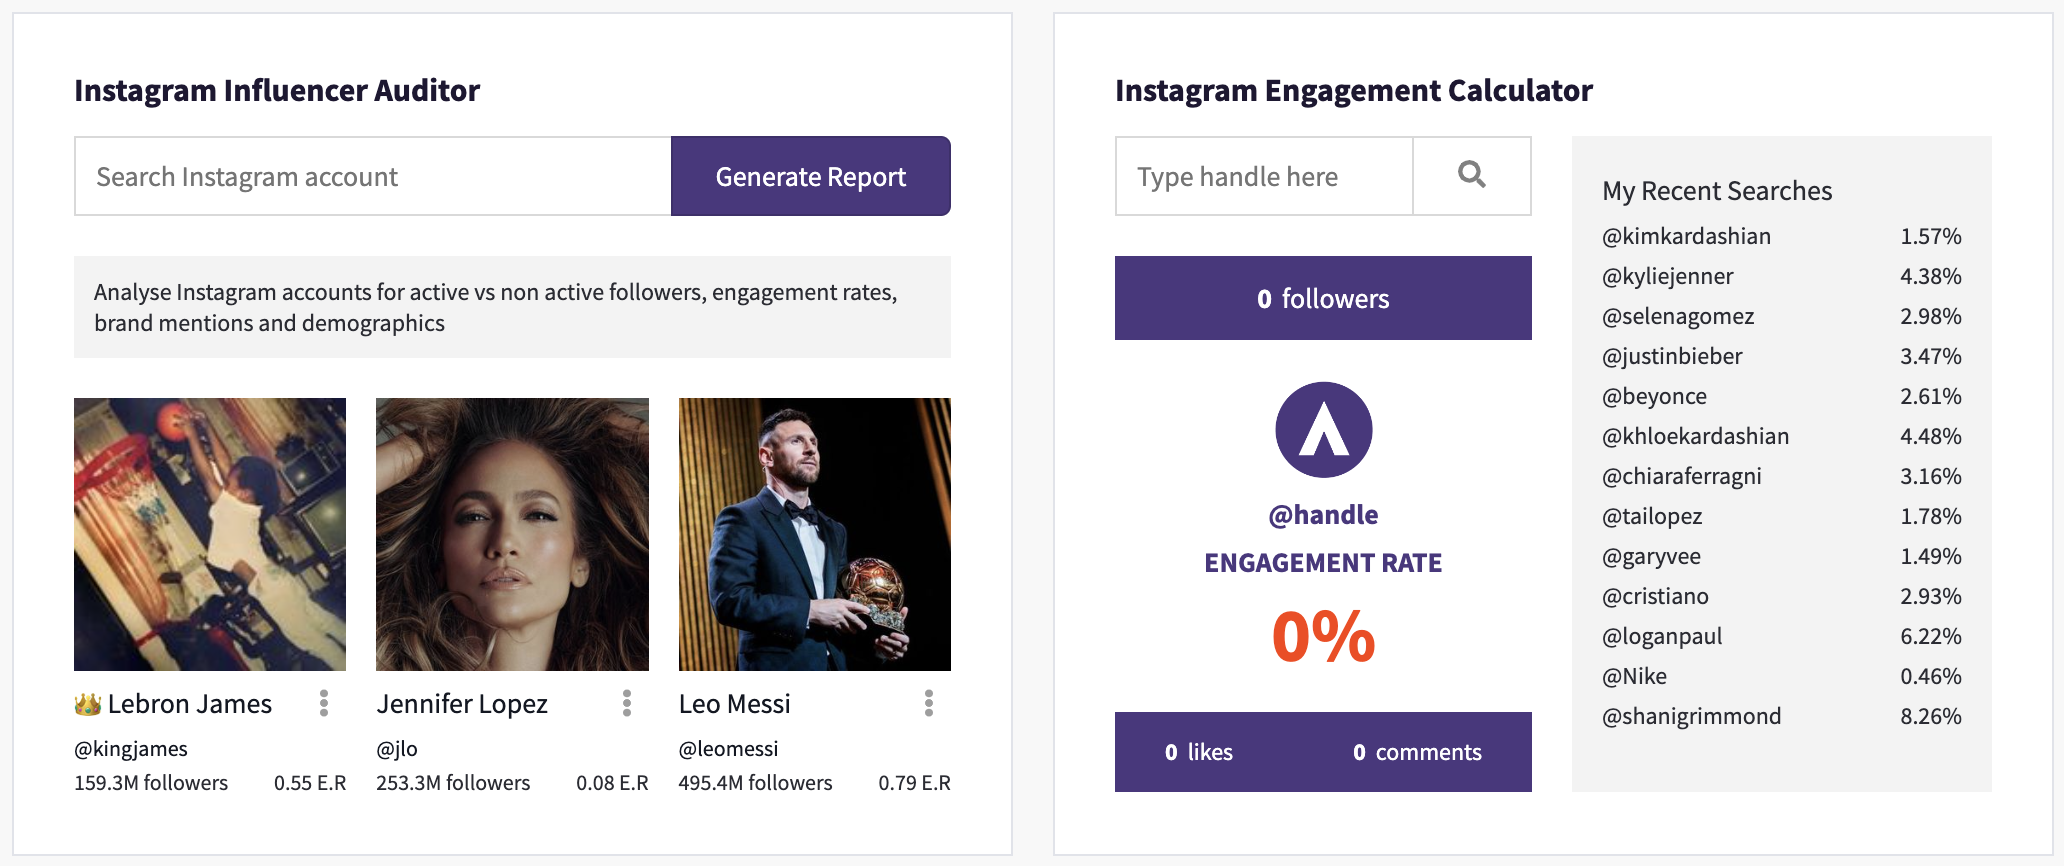 Screenshot of Phlanx's interface for auditing Instagram influencers and engagement calculator. 